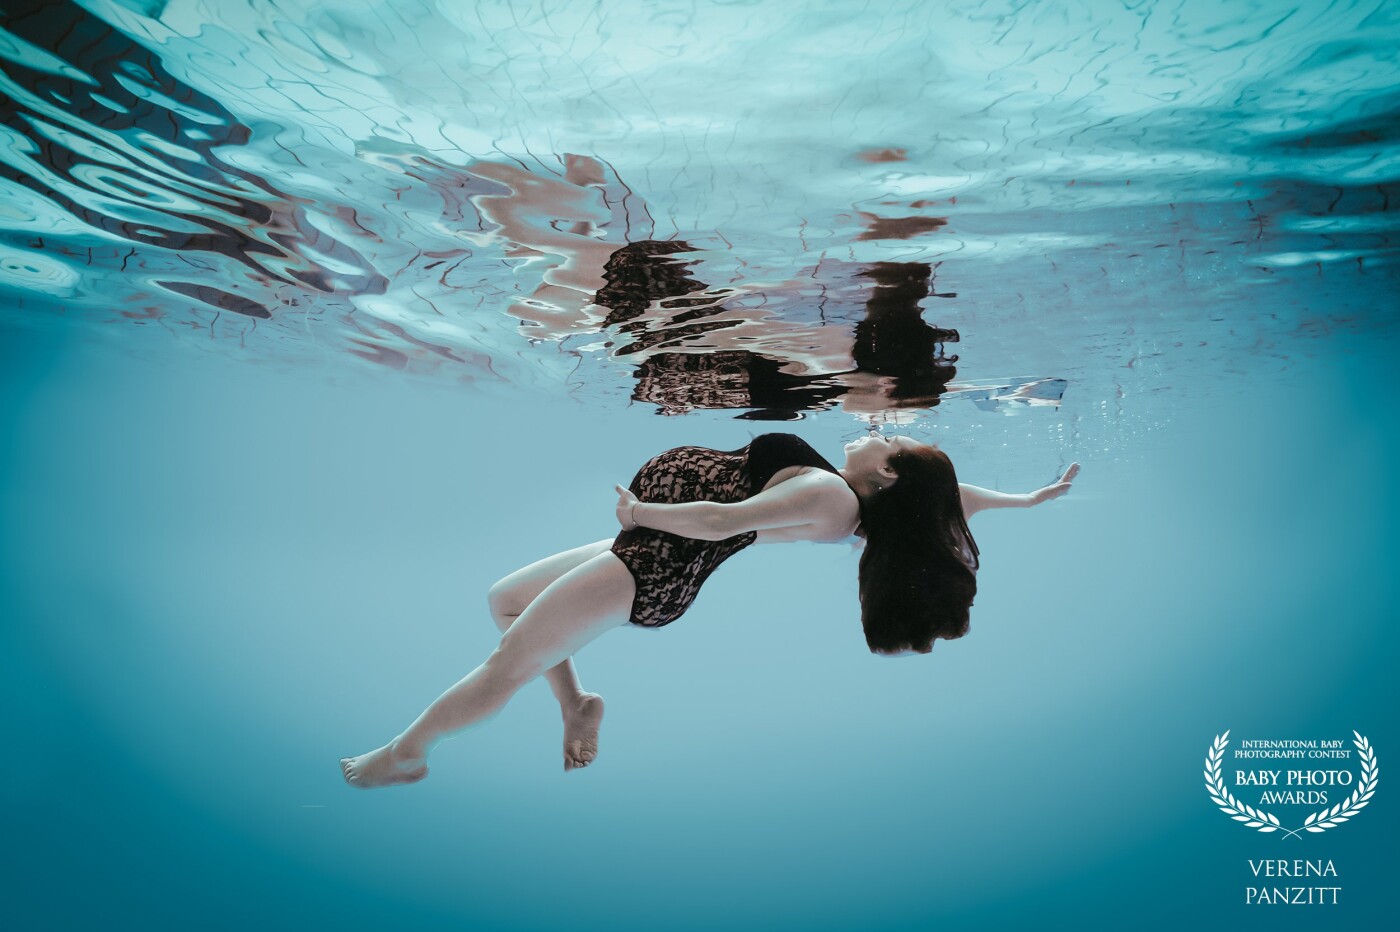 Underwater is such a unique way to photograph a woman. The weightlessness allows the woman to float and present her body in a elegant, graceful and uniquely way. The pregnant woman floating in the water can also achieve the idea of the gracefulness and maternal image of her unborn baby that floats on her womb.